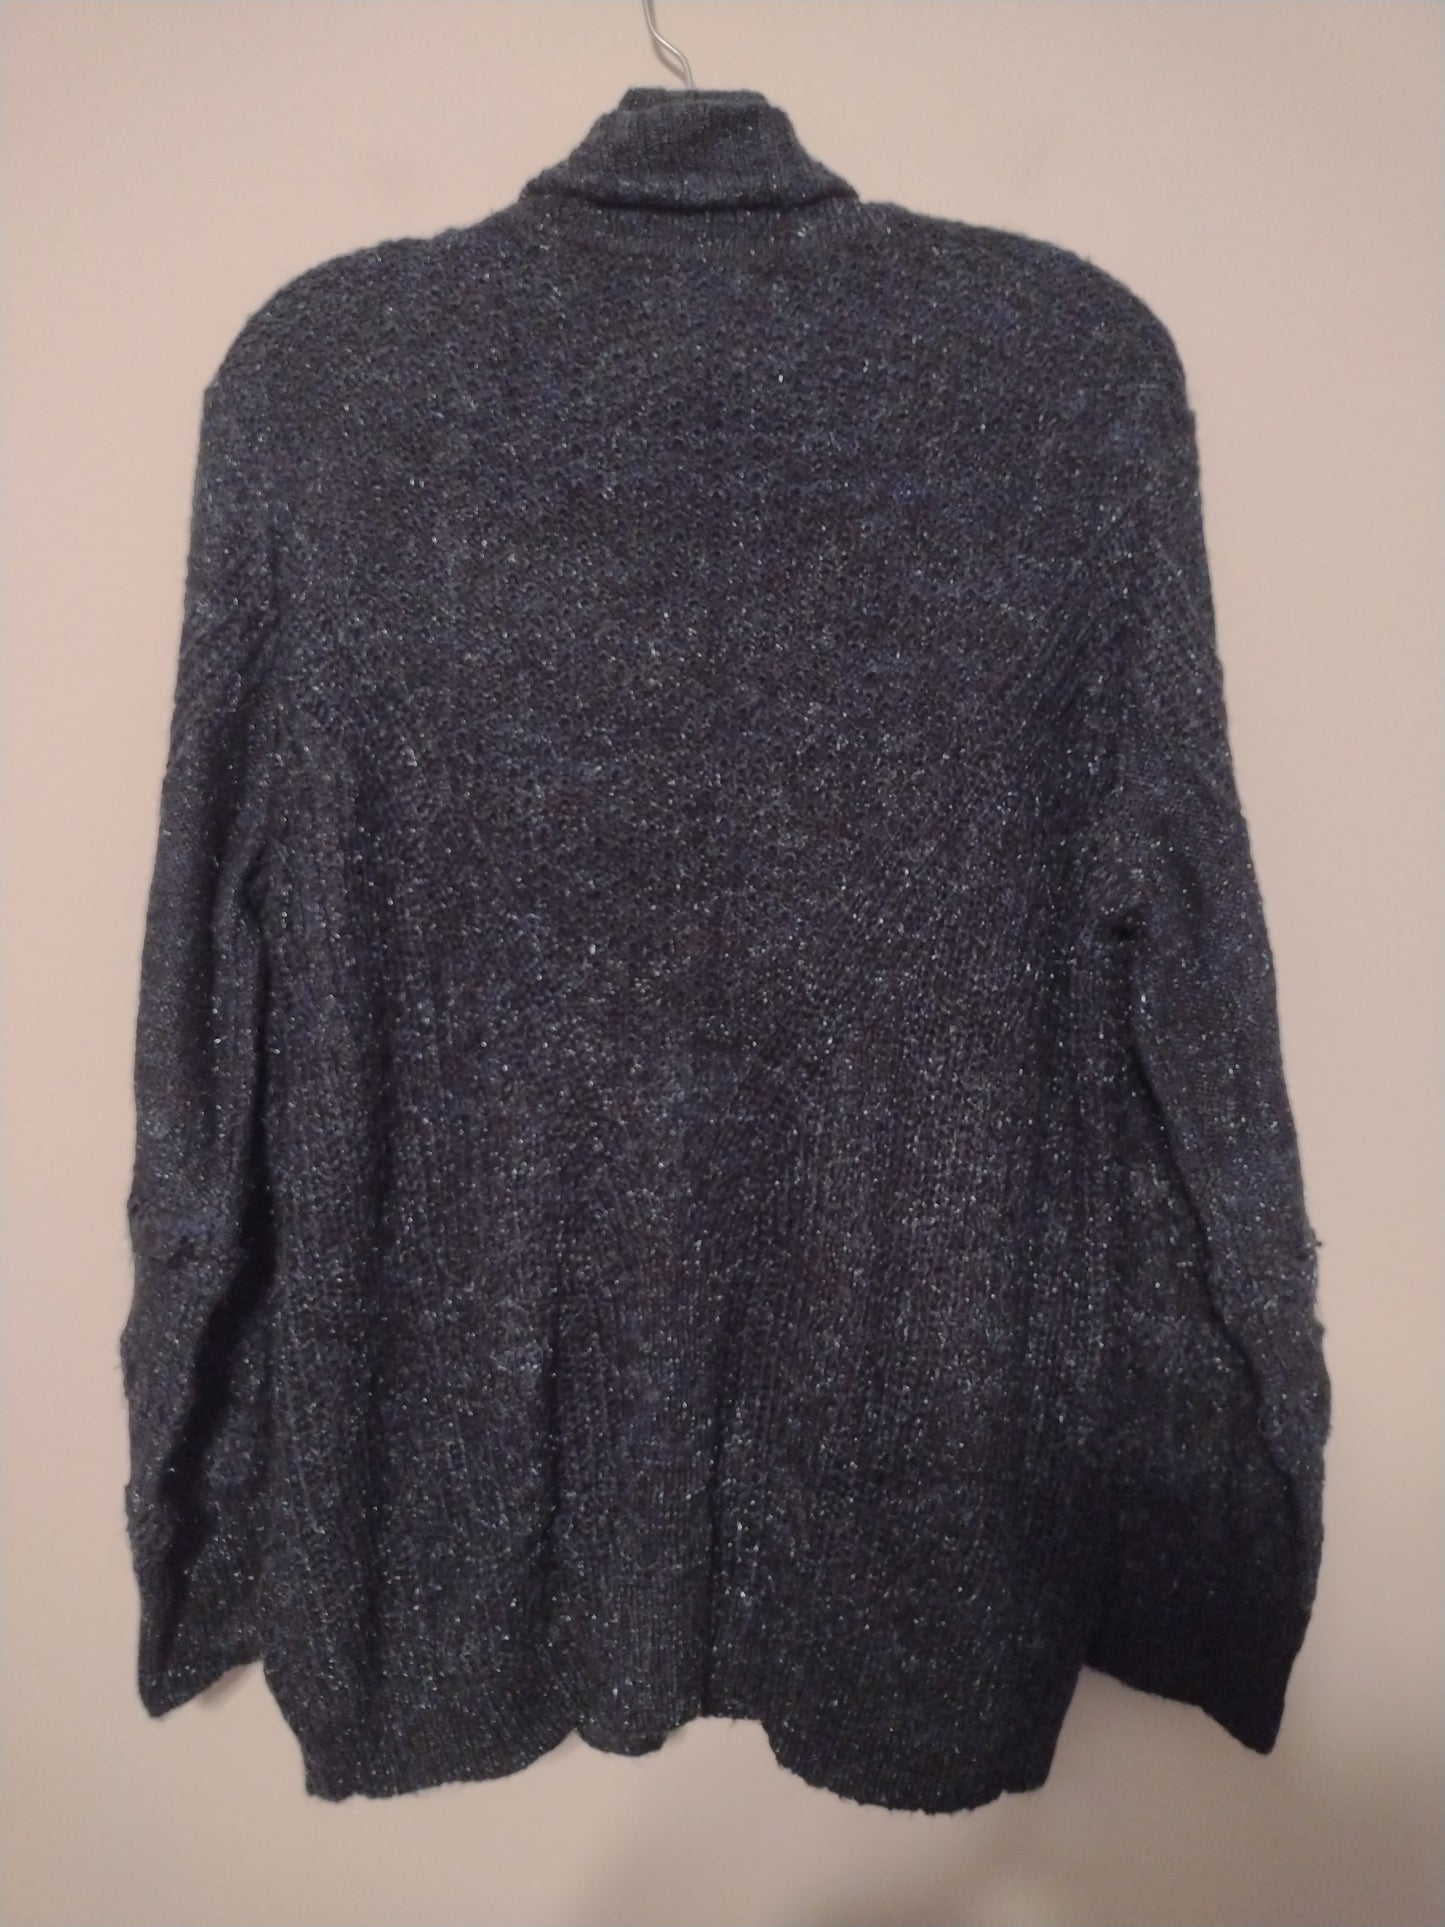 Cardigan By Knox Rose  Size: M